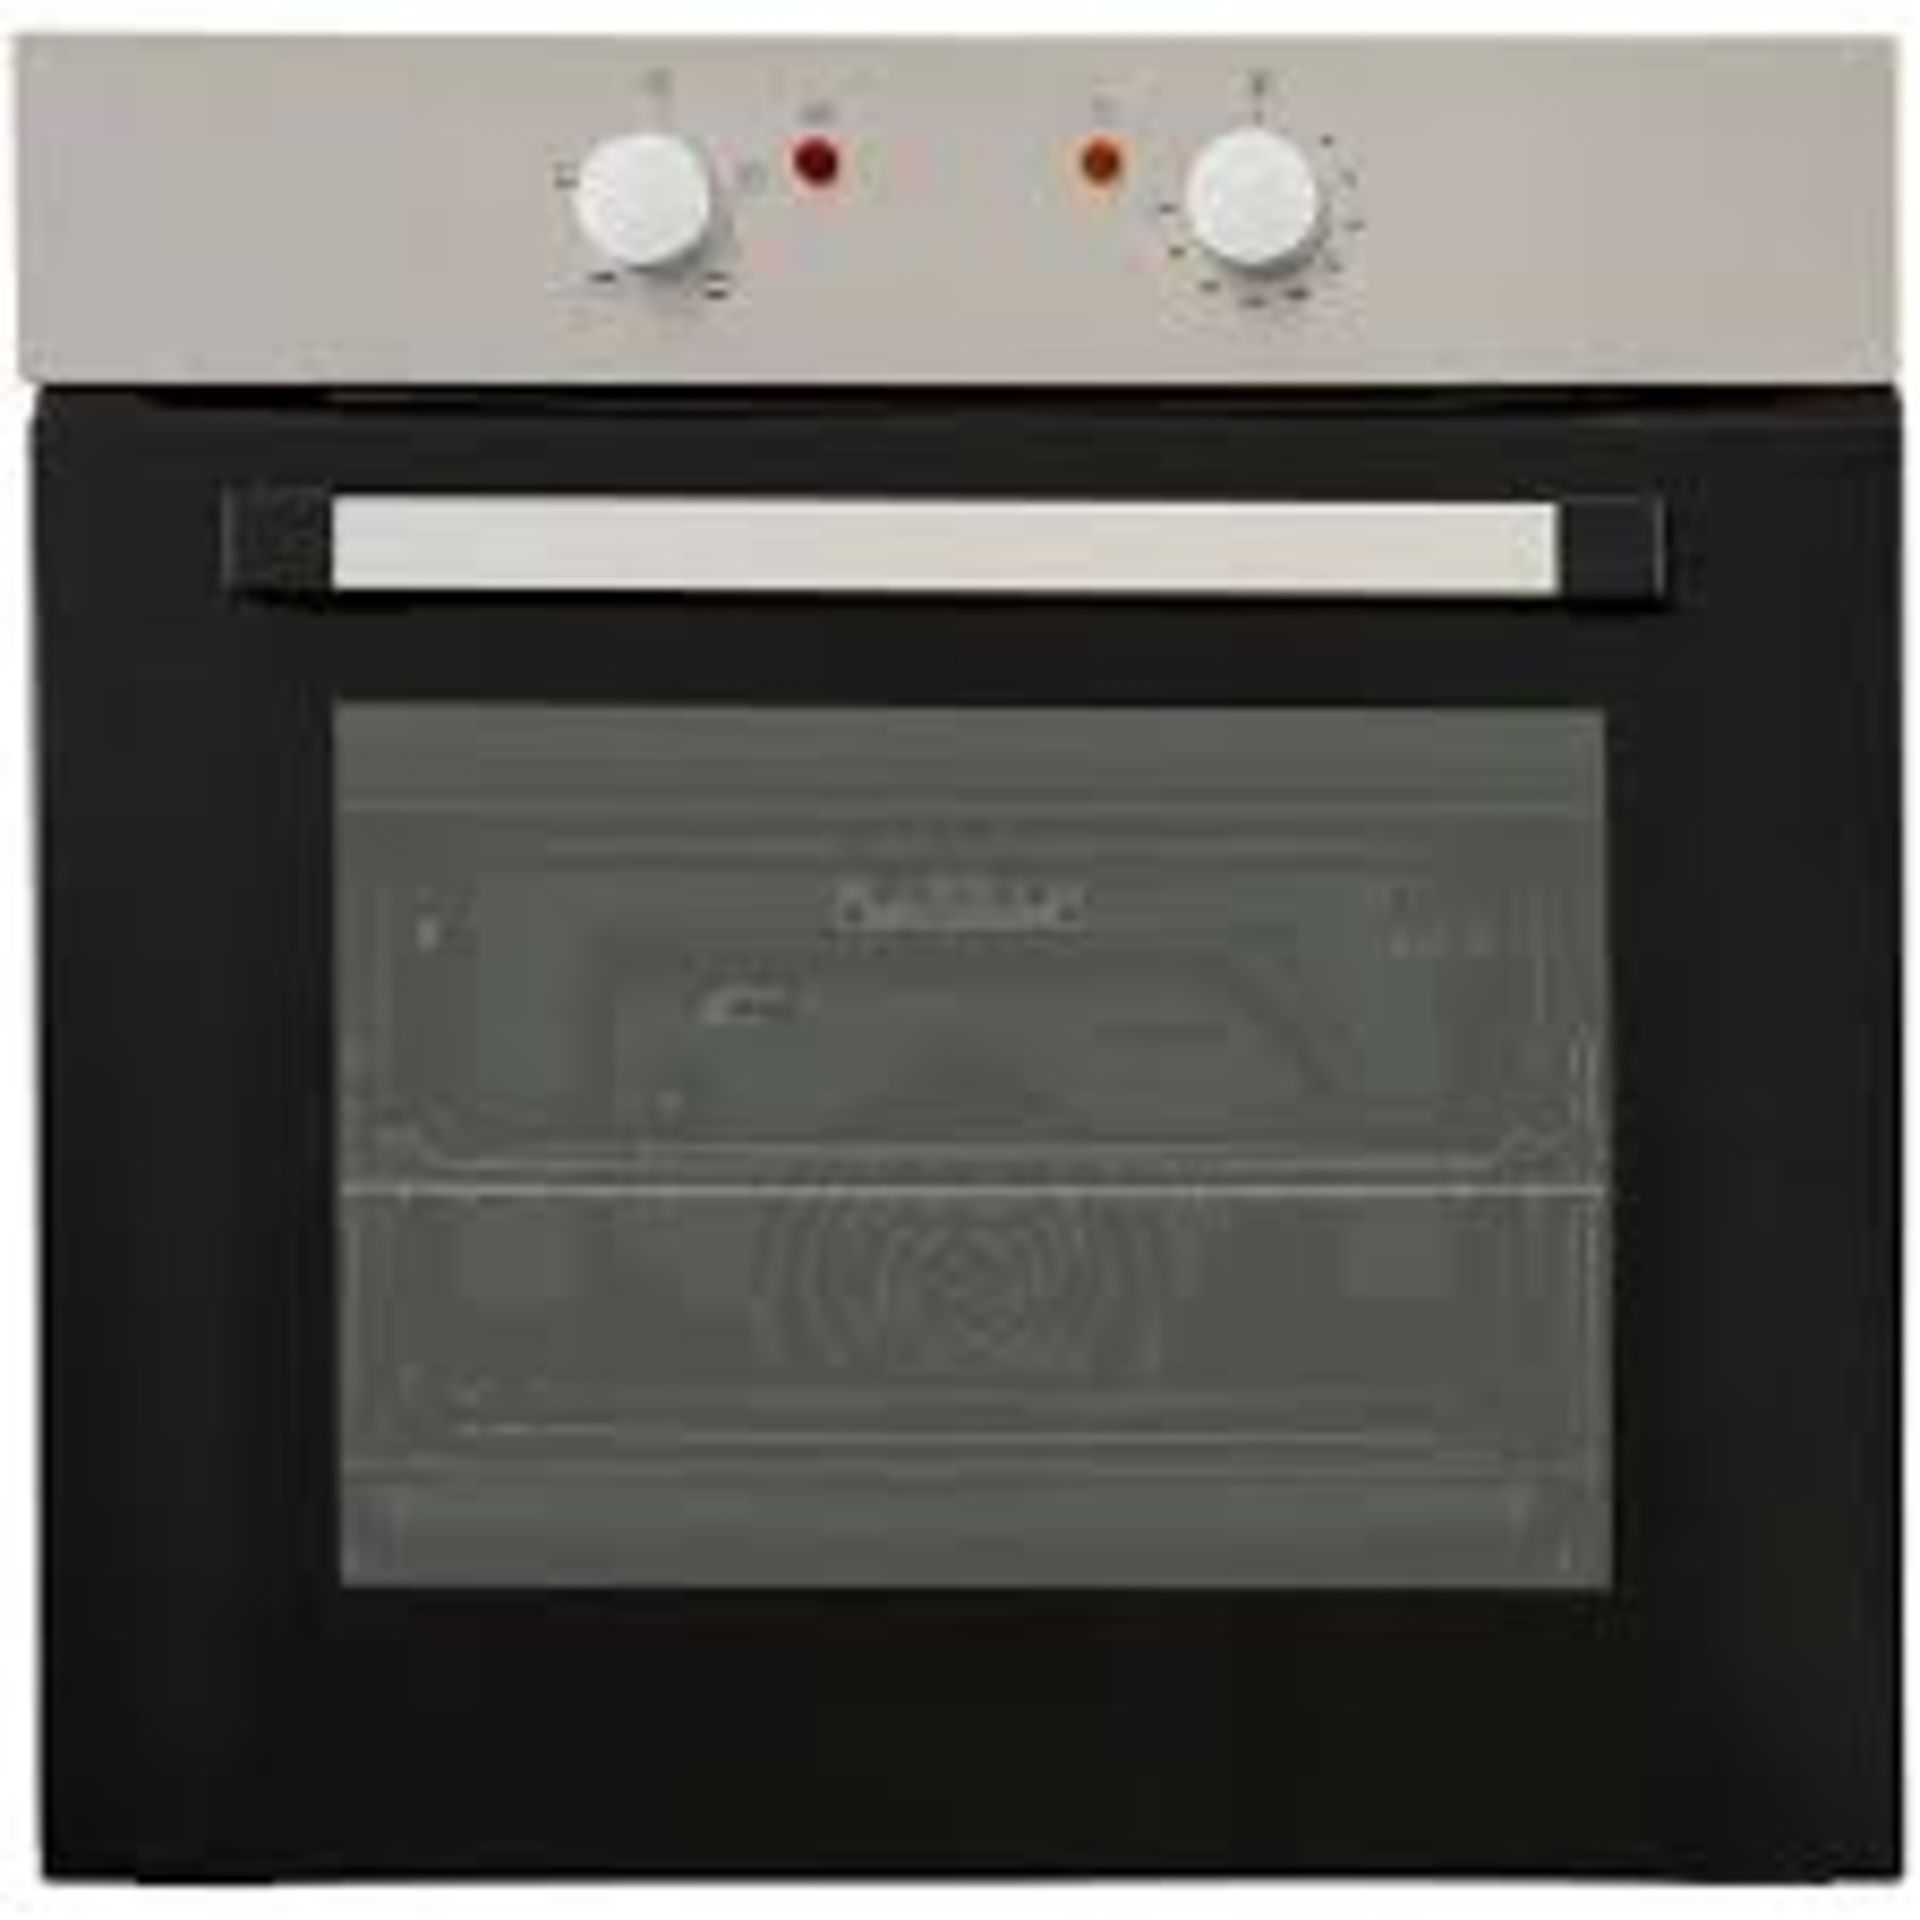 CSB60A Built-in Single Conventional Oven - Chrome effect. - R14.